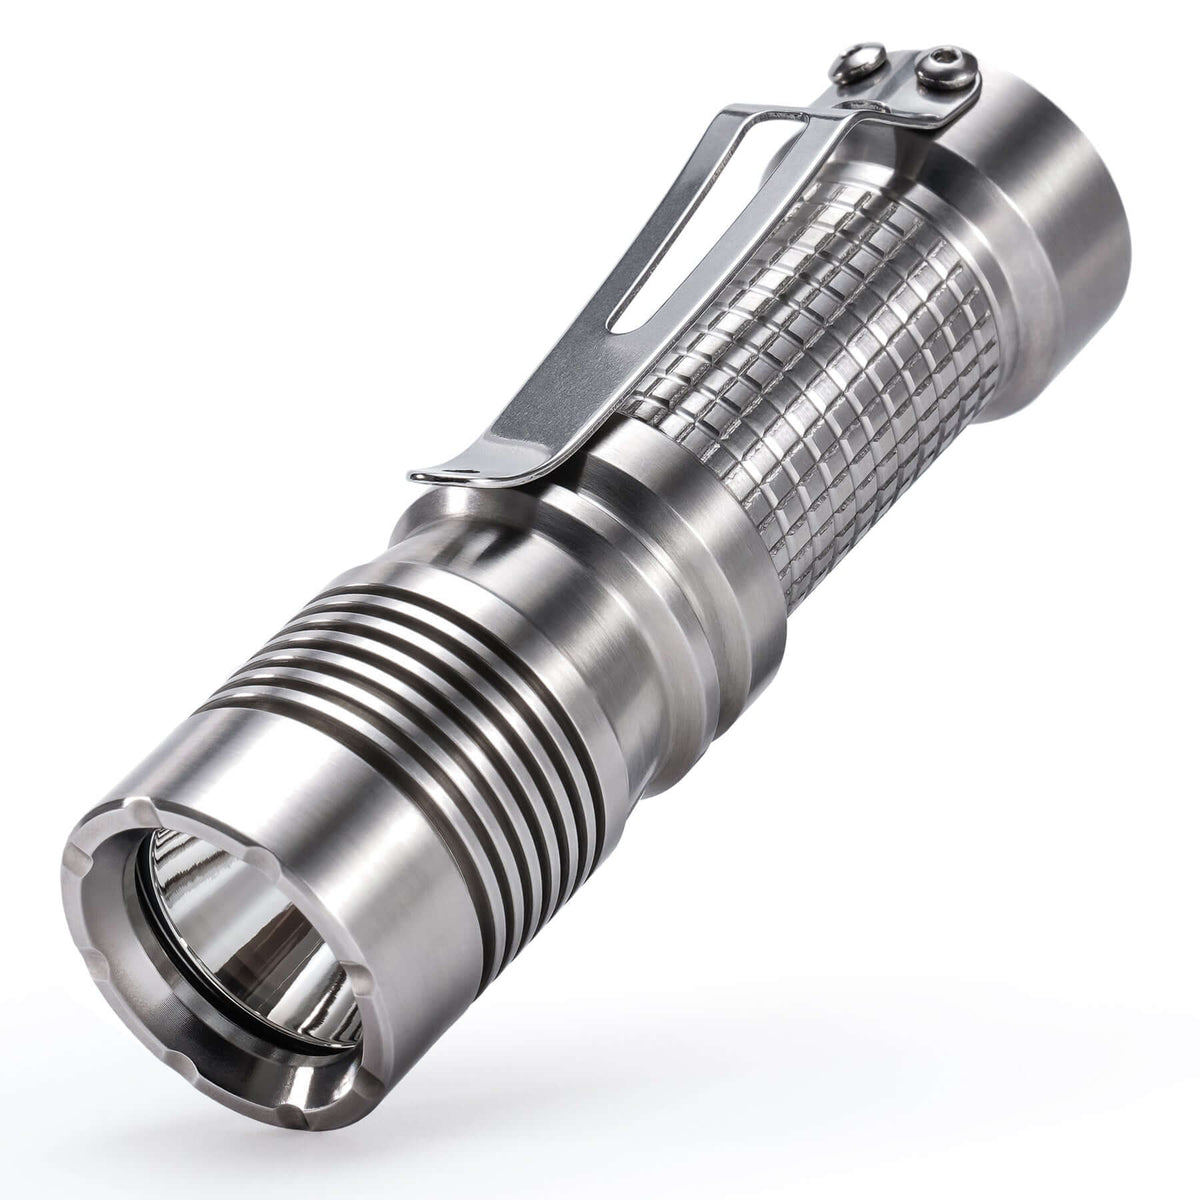 KF01 Stainless Steel Rechargeable Flashlight